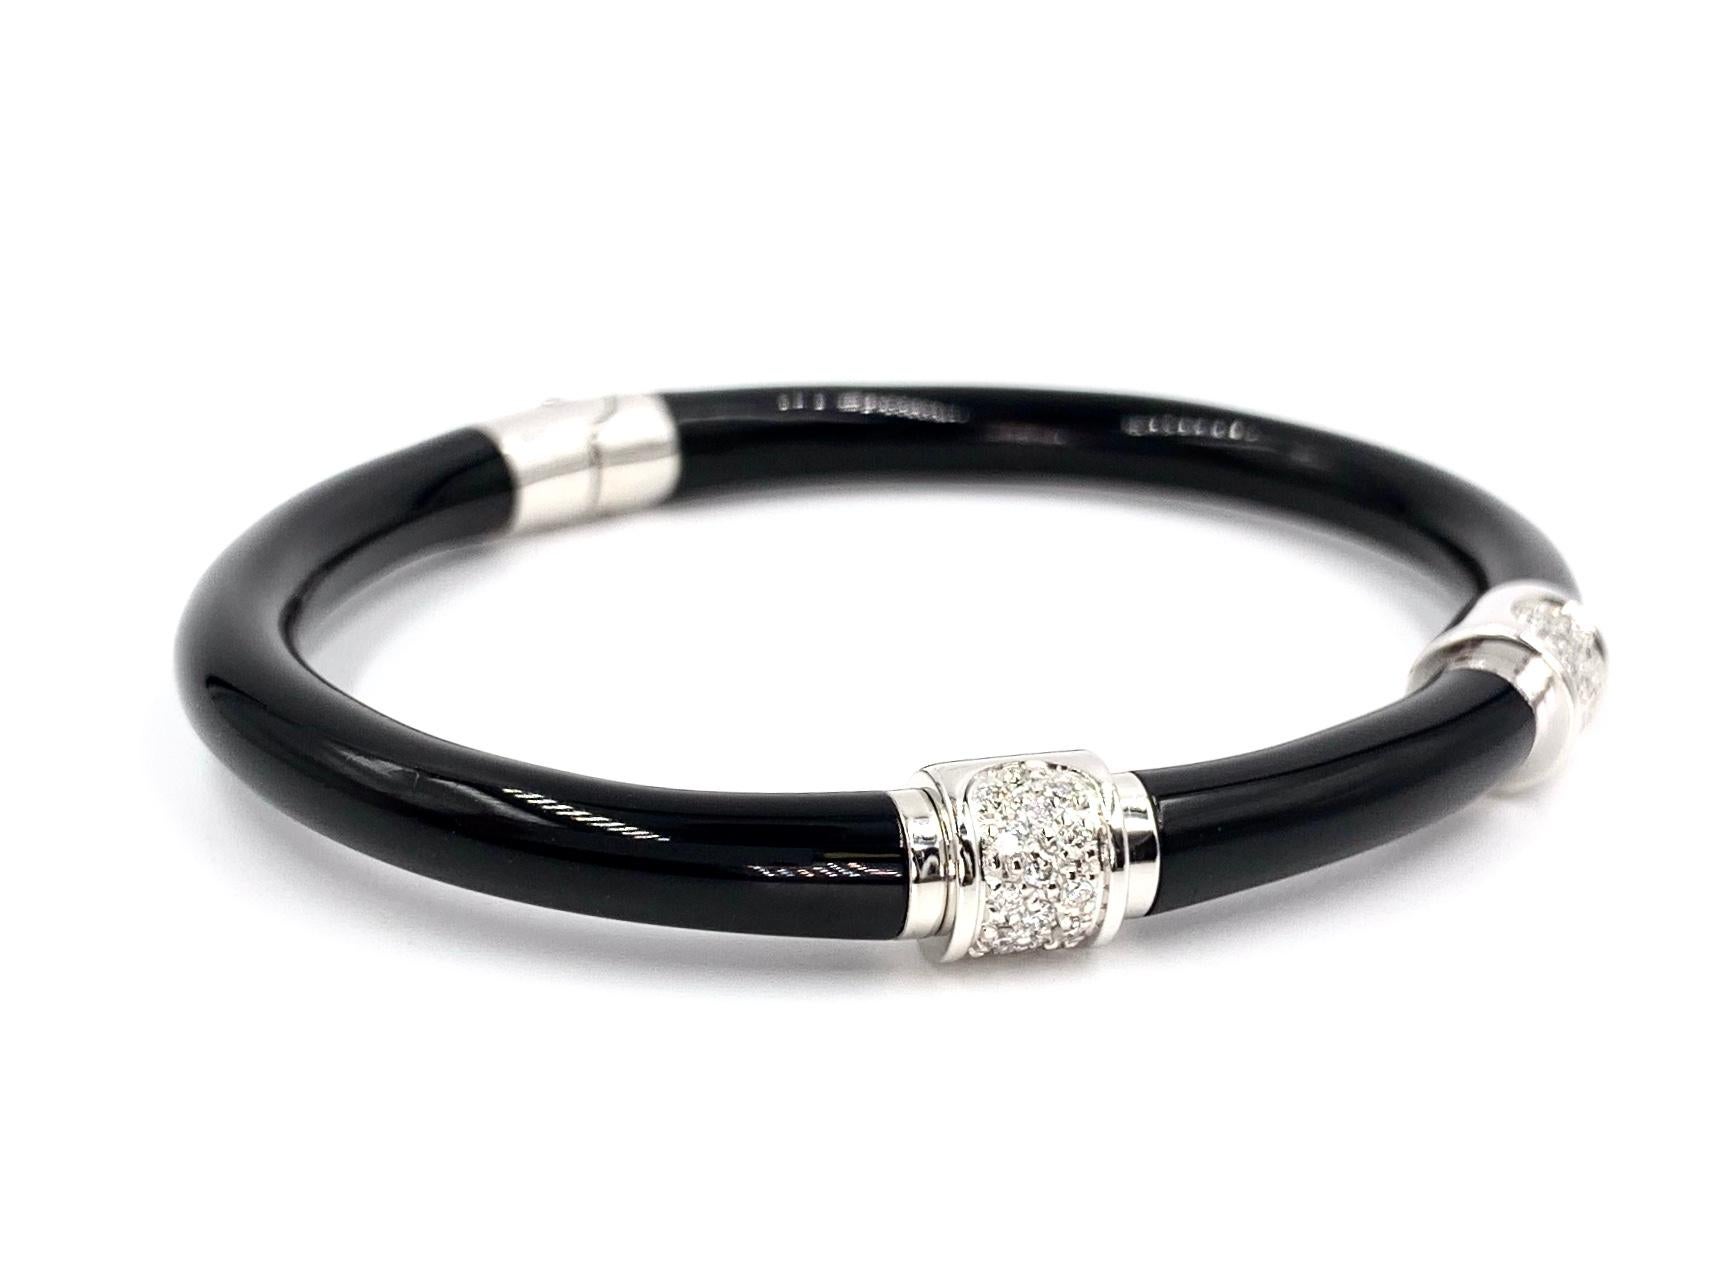 Handcrafted in Italy, SOHO jewelry features precious 18 karat white gold expertly overlaid with sleek and lustrous stark black enamel. SOHO enamel jewelry is known for it's durability and smooth feel. This wearable and modern oval bangle features